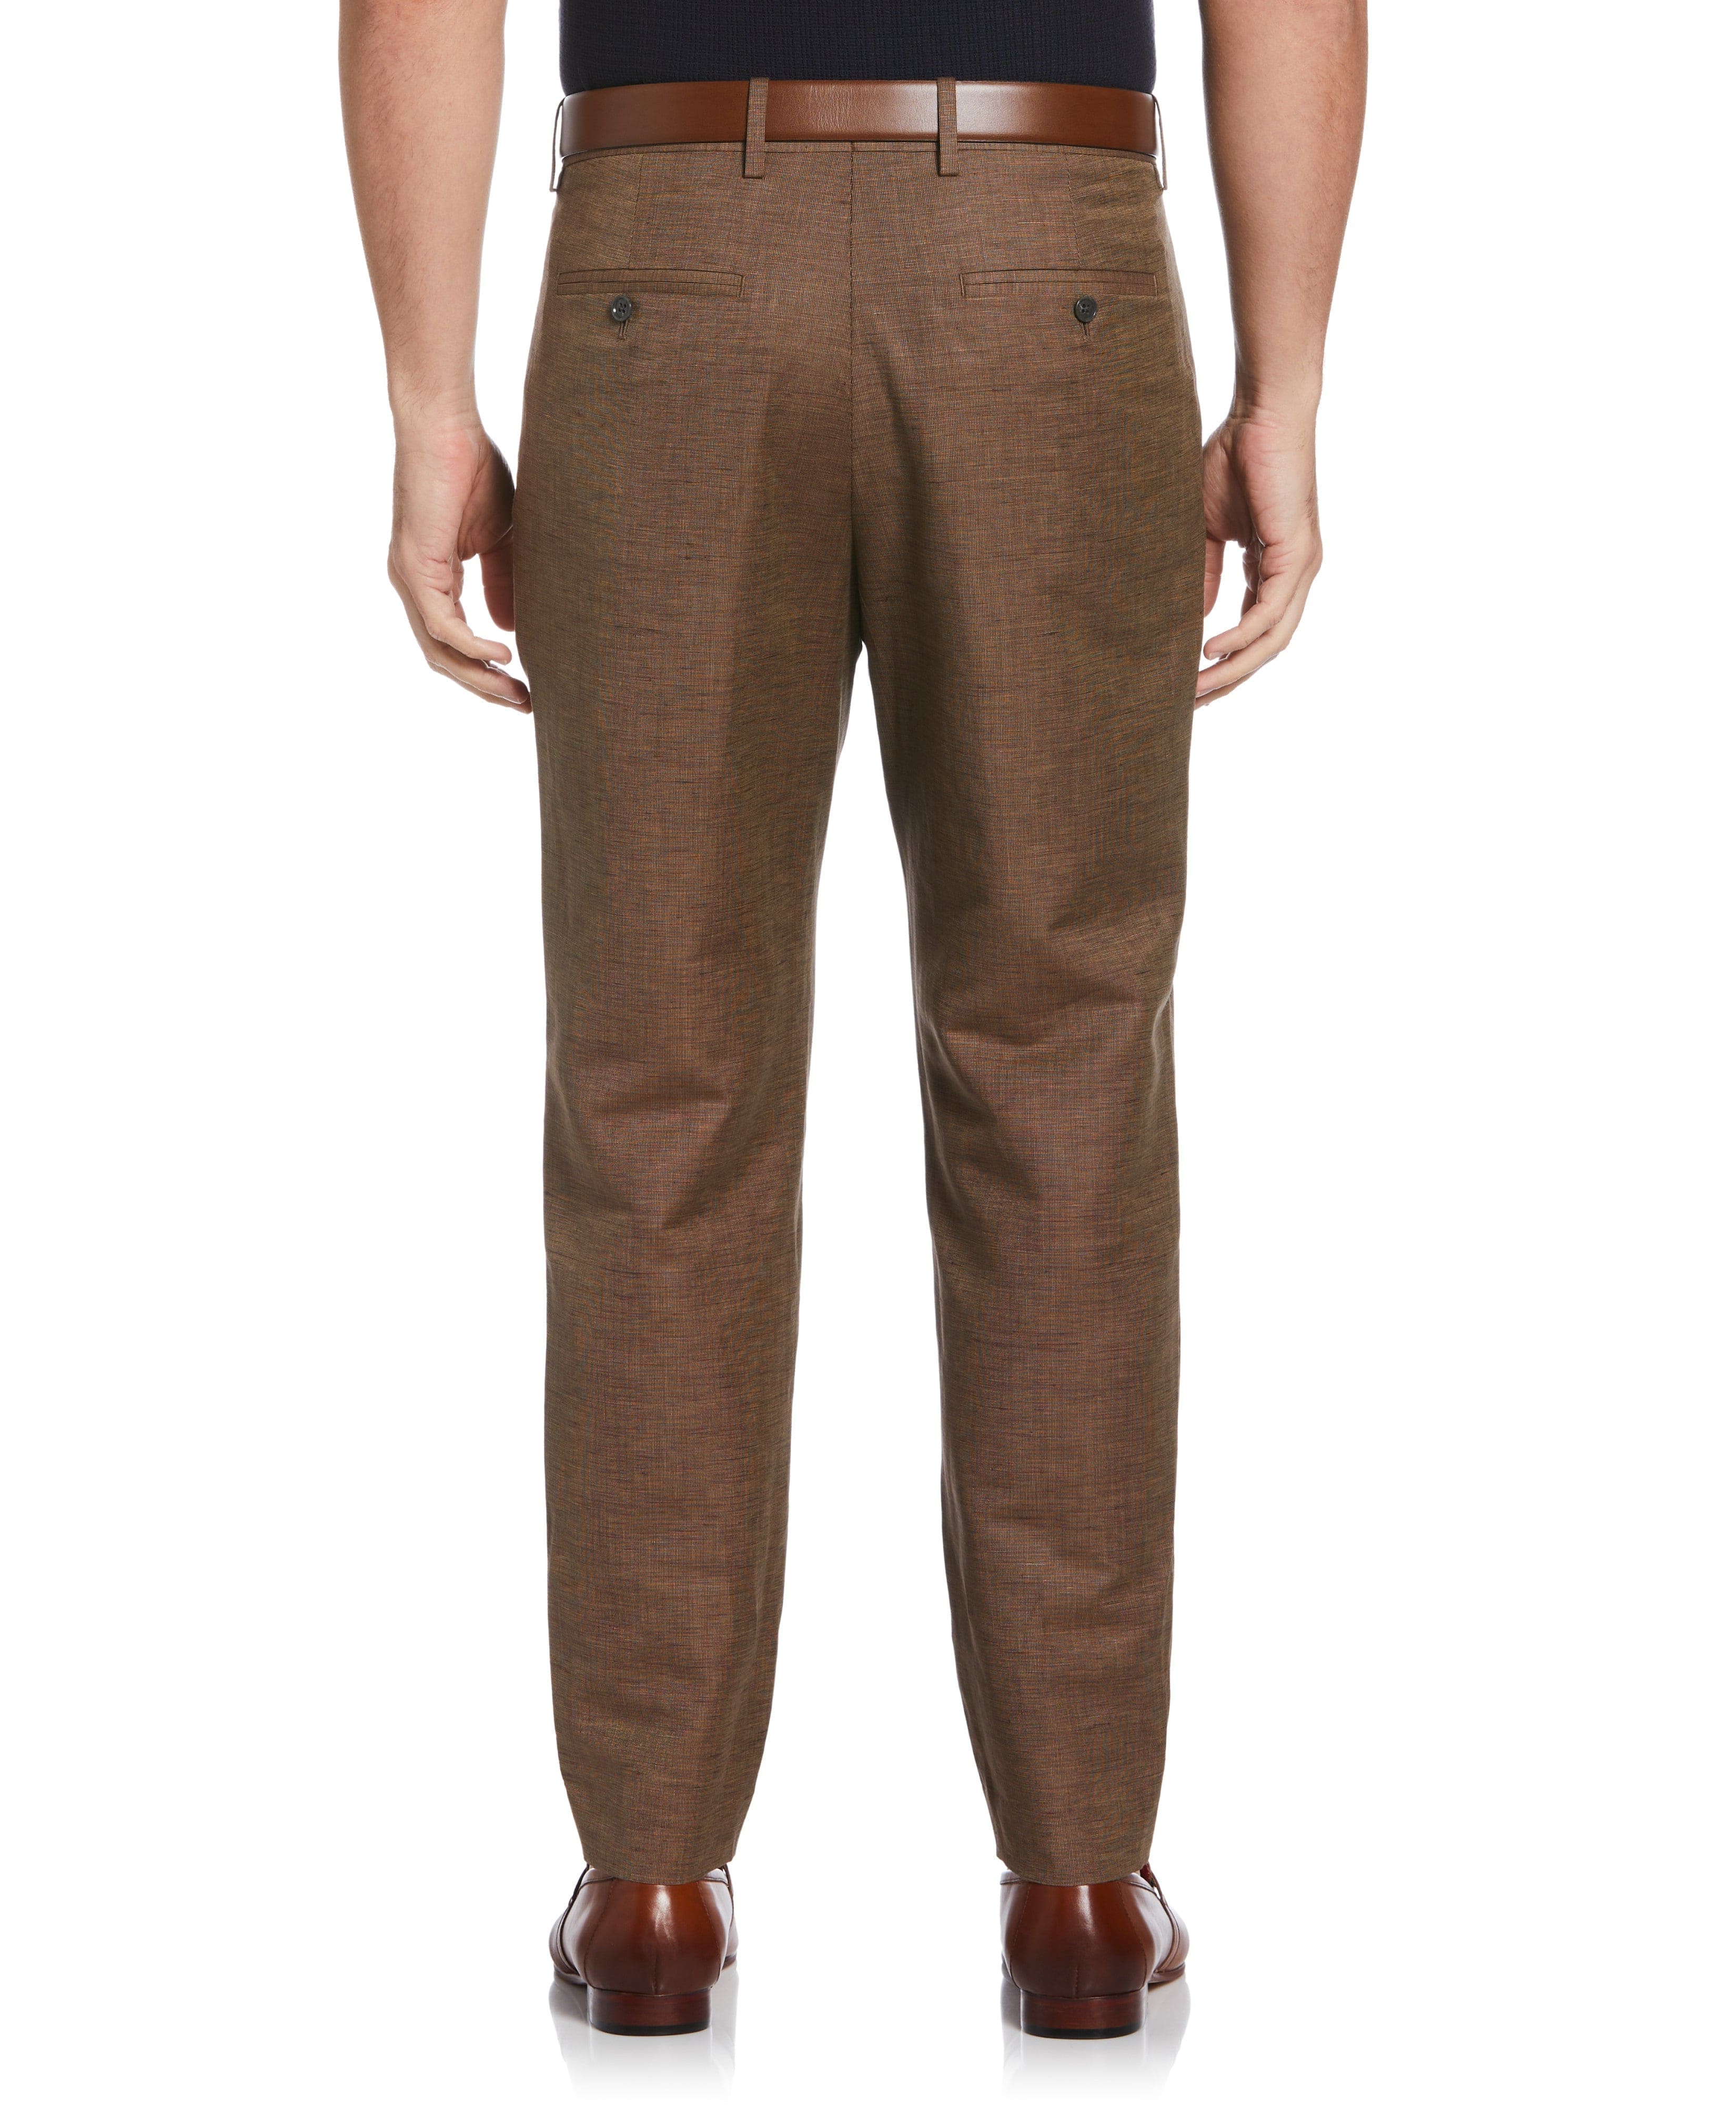 Men's Tapered Fit Pleated Pants | Perry Ellis